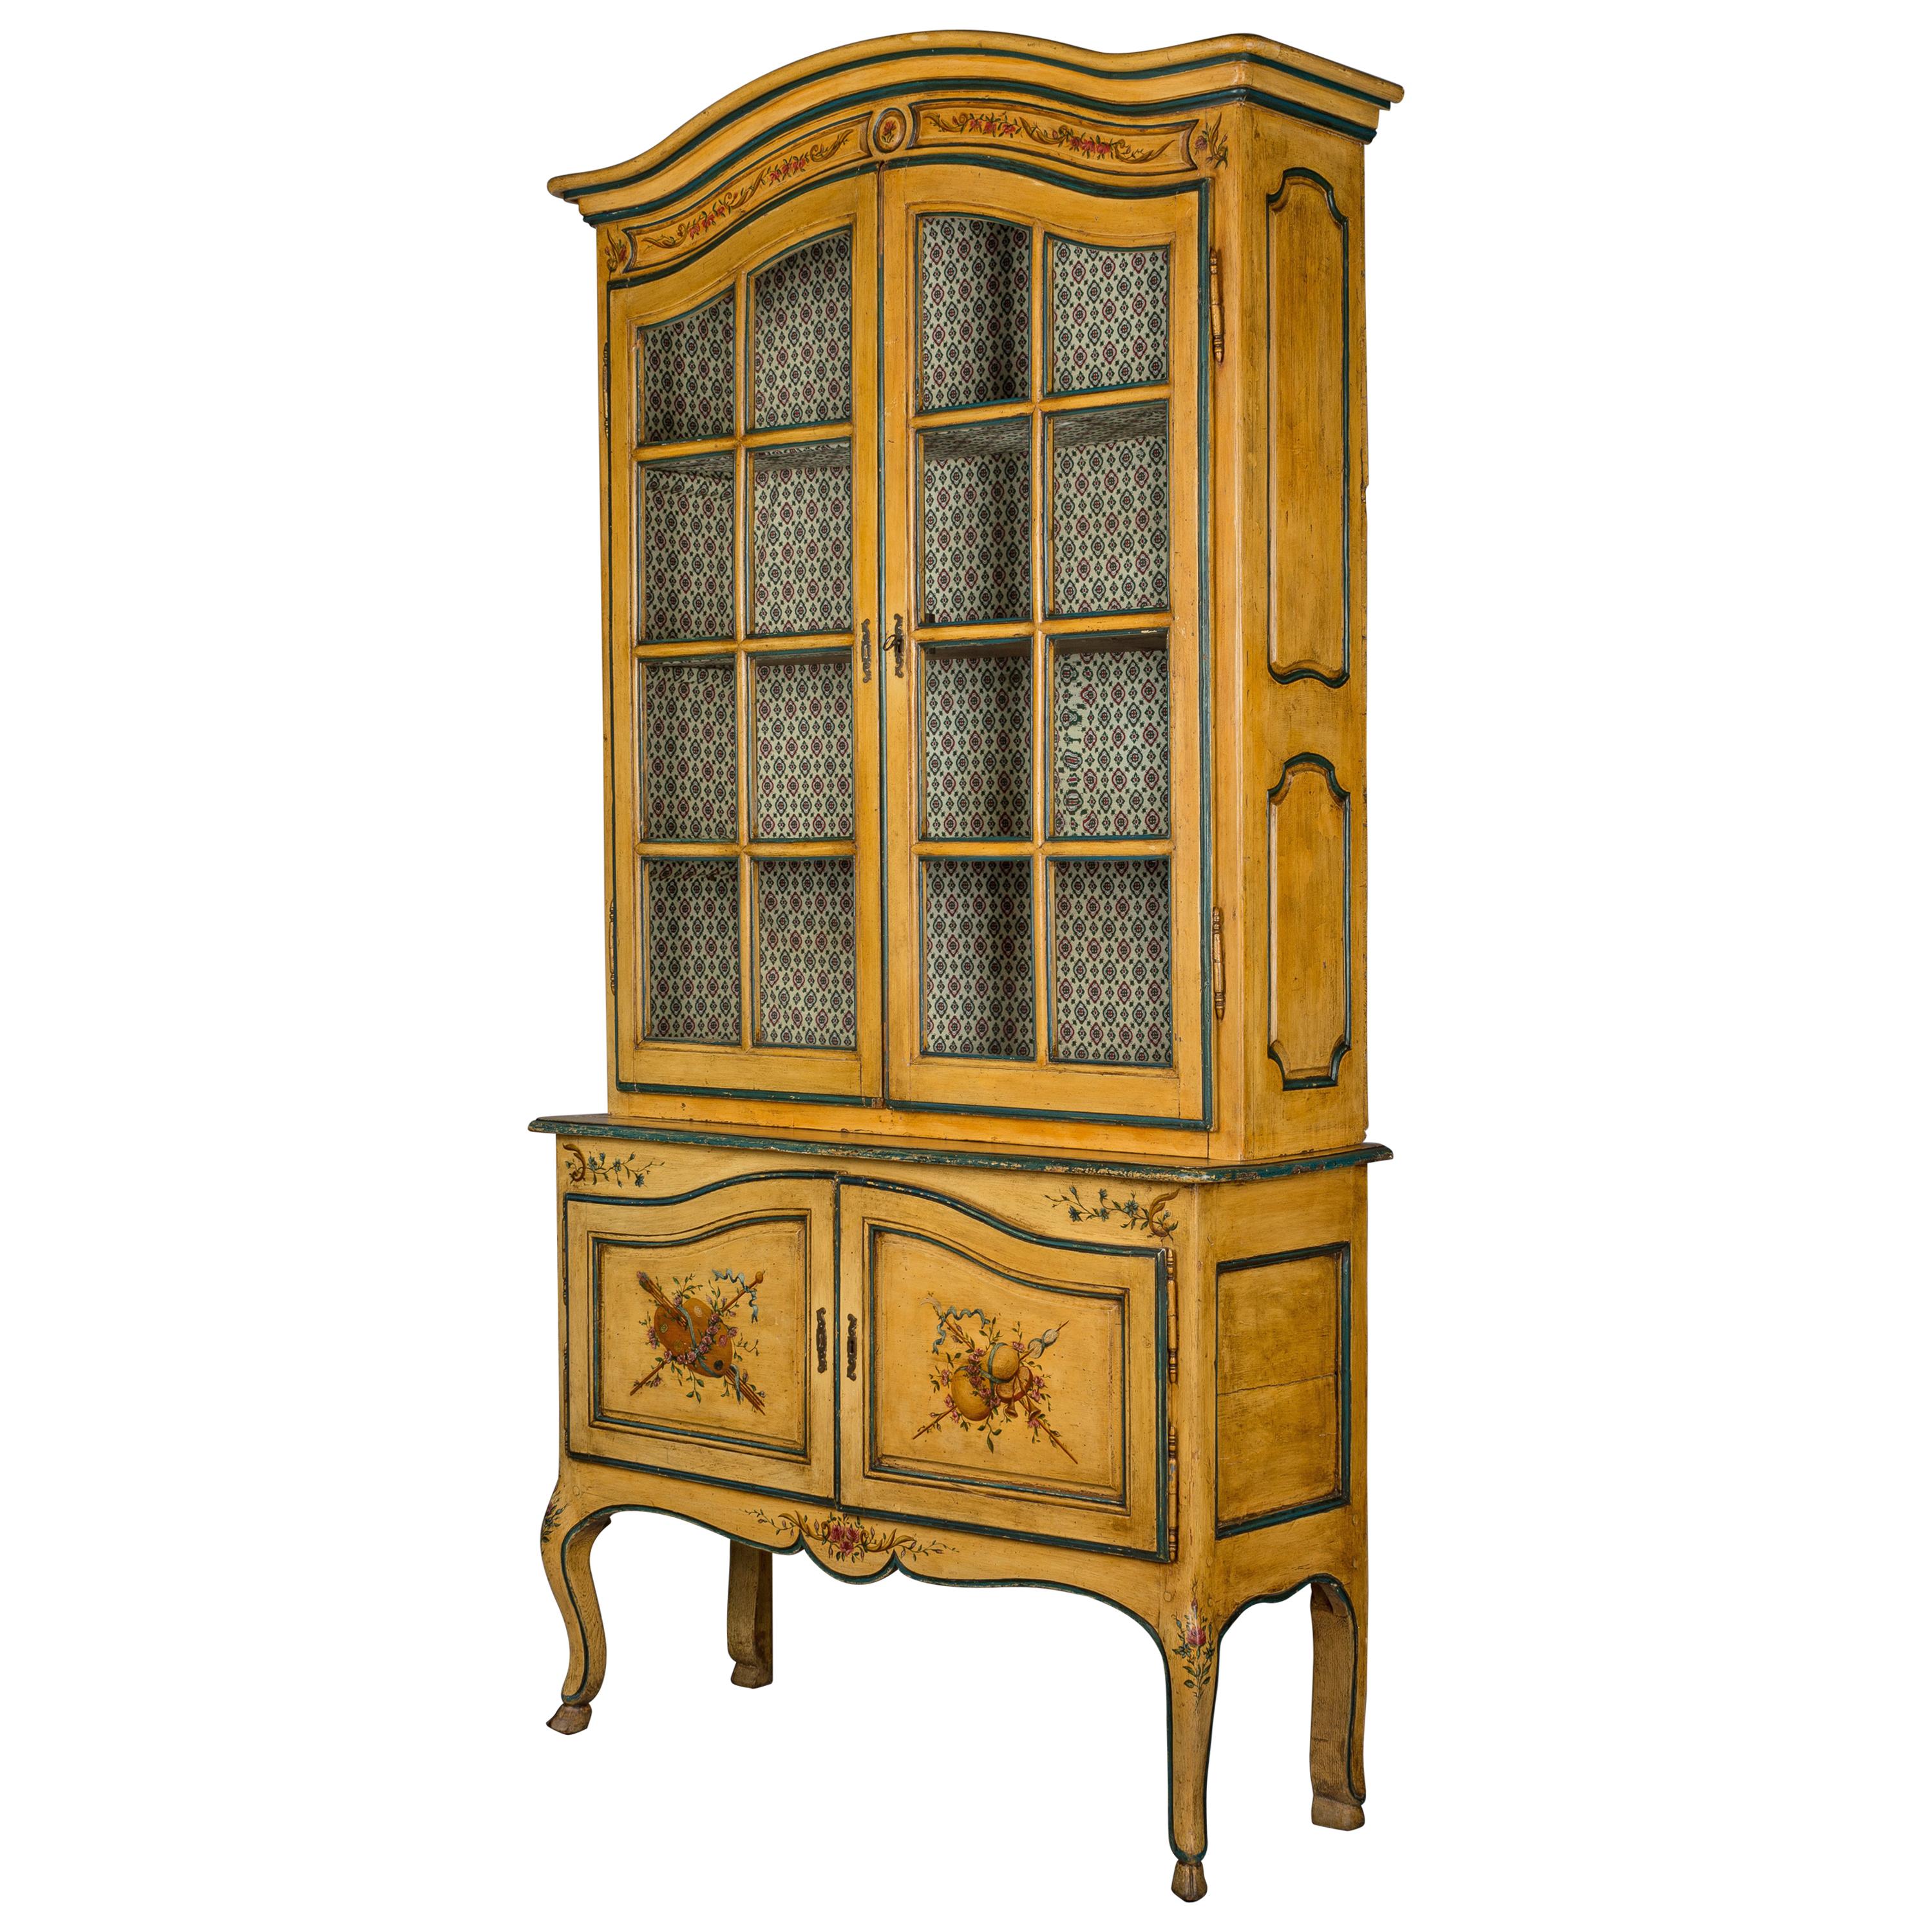 19th Century French Louis XV Style Vitrine or Bookcase